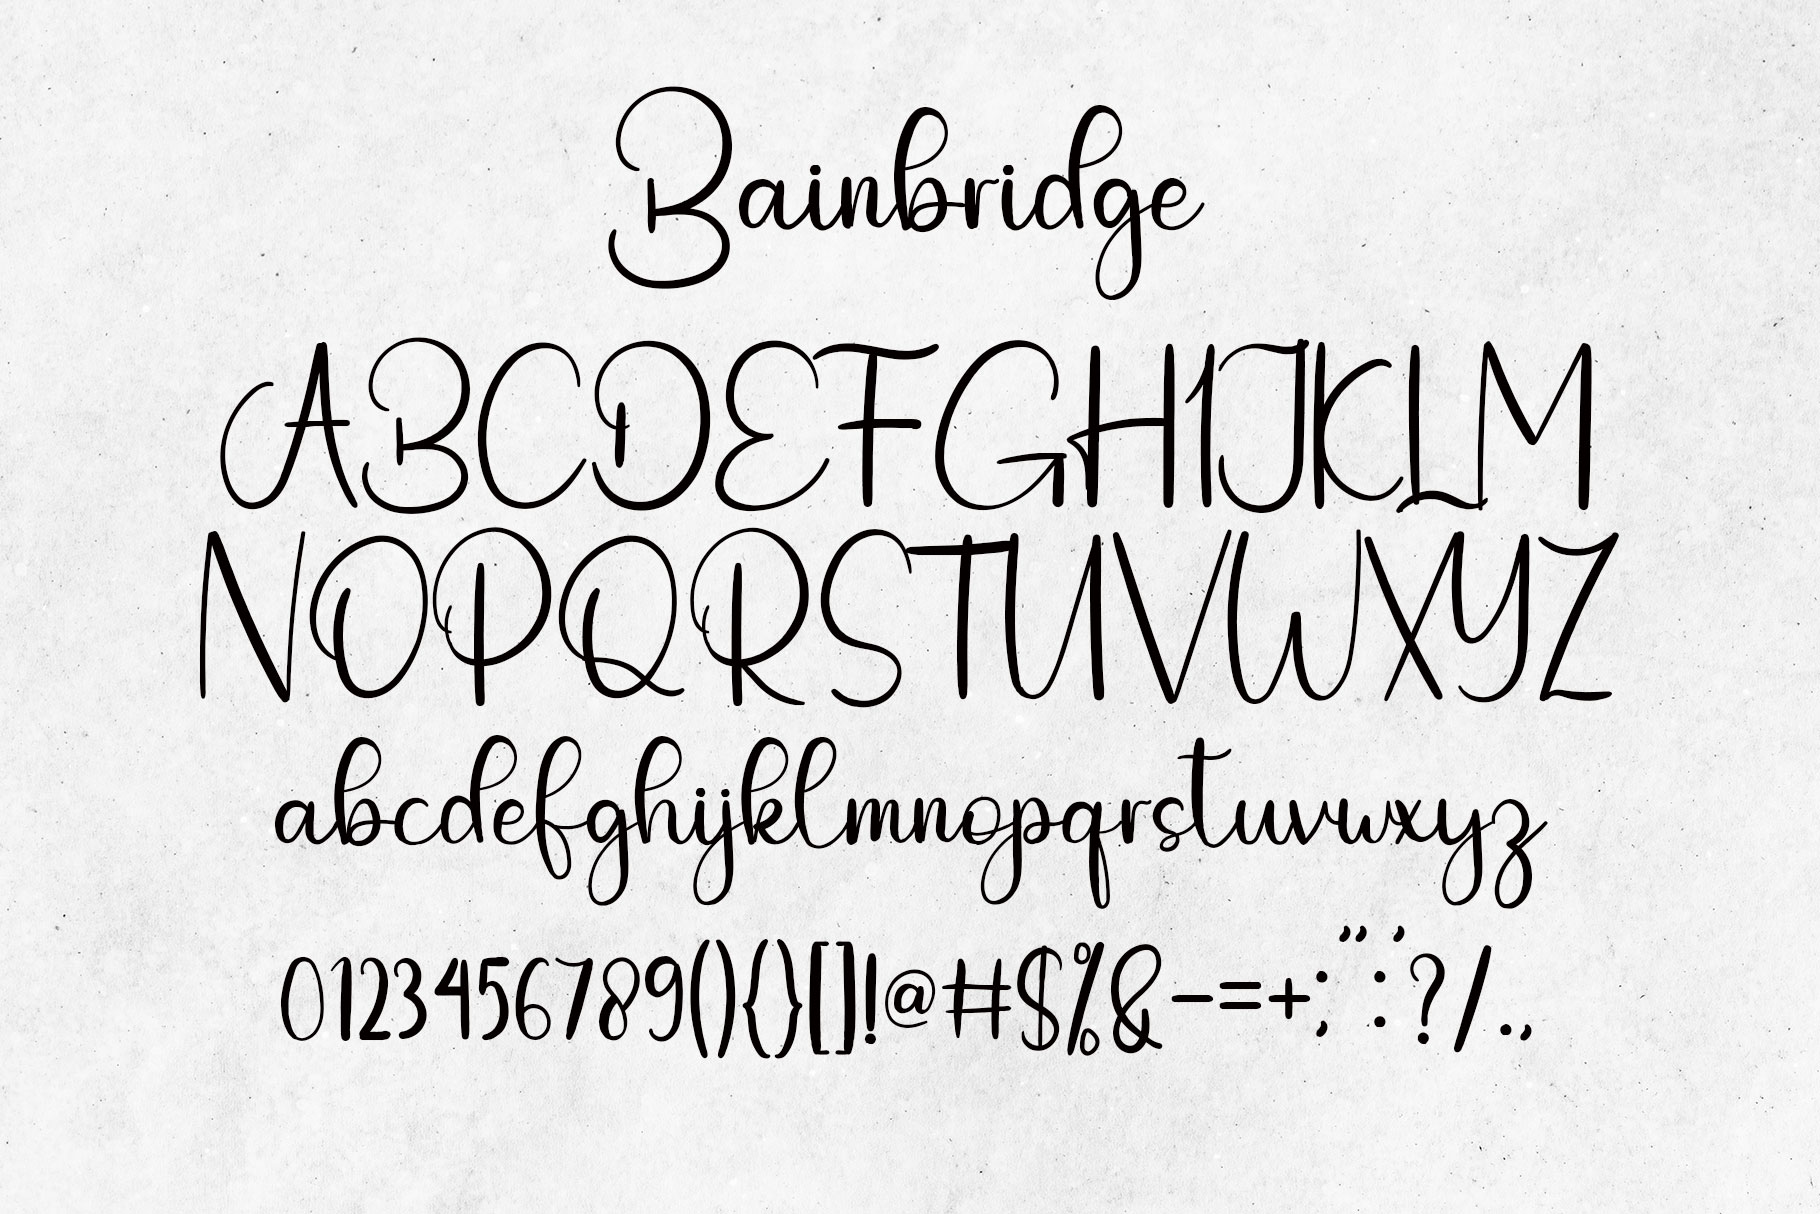 Image with symbols and letters of Bainbridge colorful font